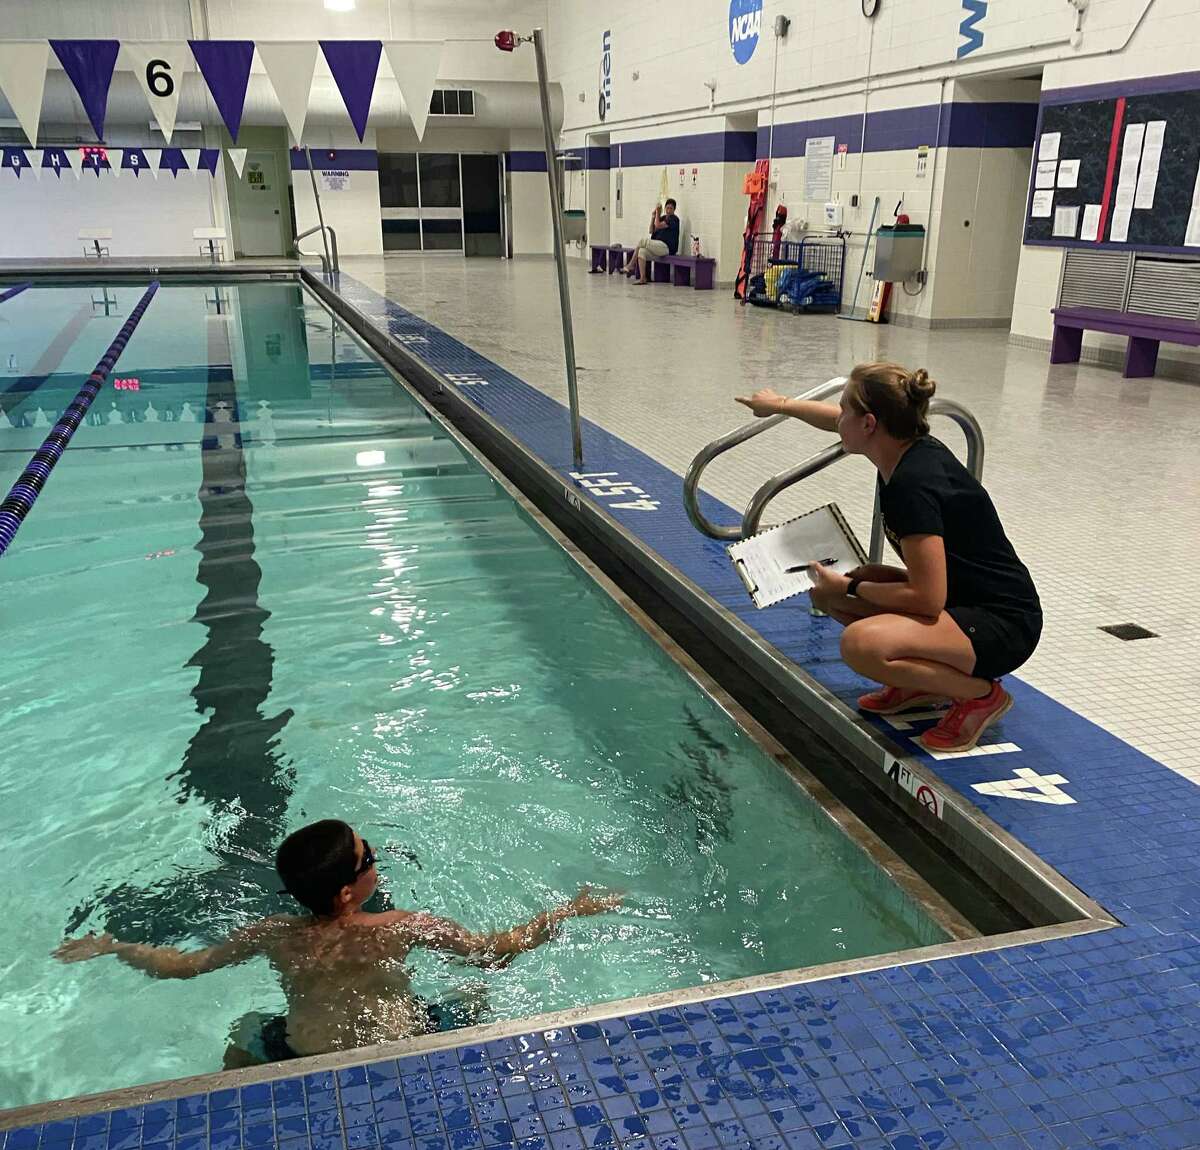 Trumbull Pisces coach Jess Daigle instructs a swimmer during tryouts on Aug. 30, 2022 at the University of Bridgeport.